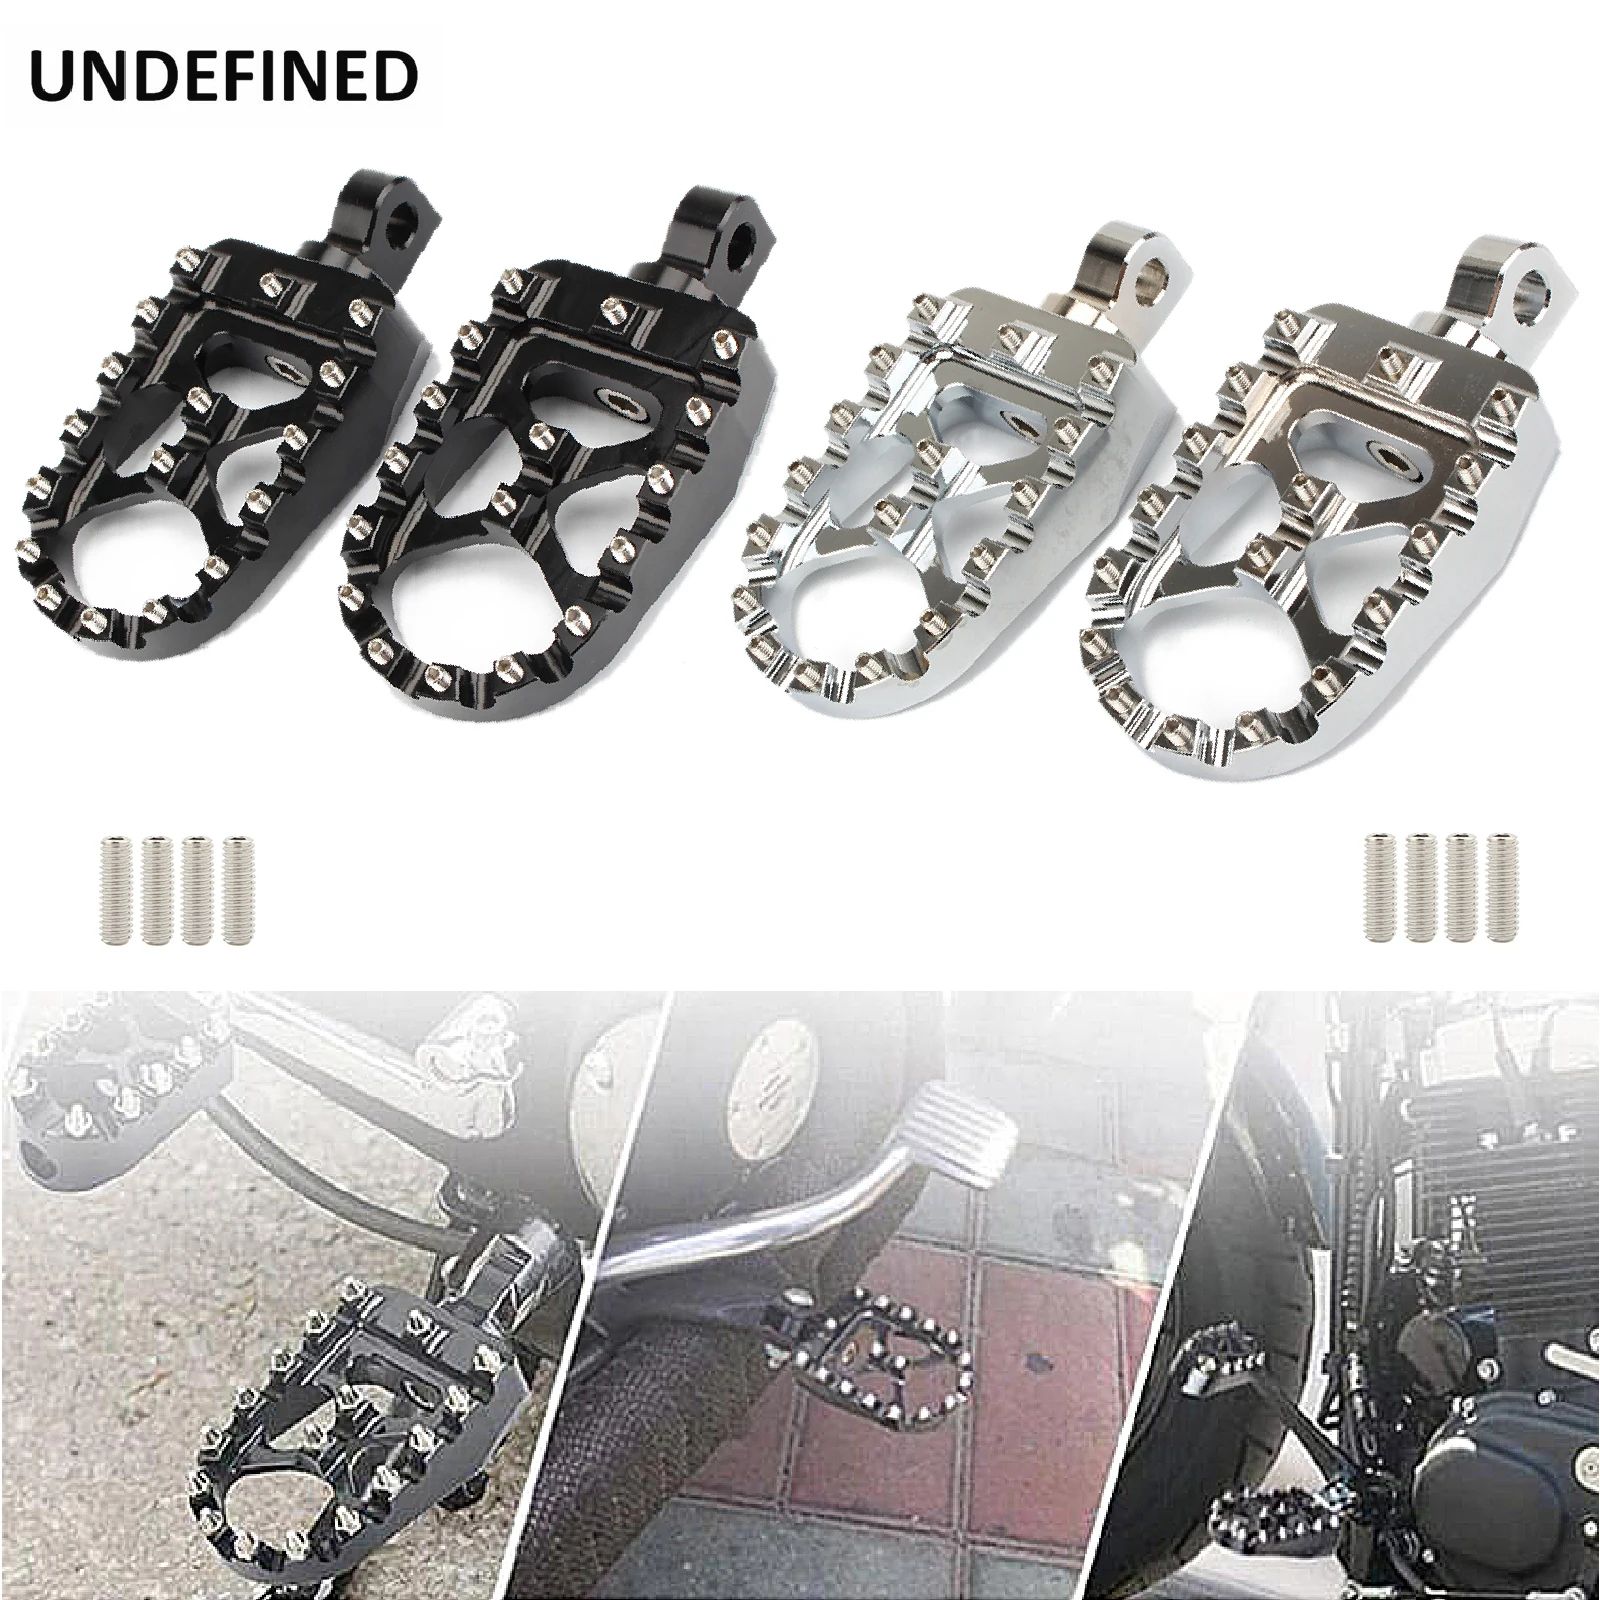 MX Foot Pegs Motorcycle Front Rear Wide Fat Footrests Bobber For Harley Dyna Street Bob Fatboy Softail Sportster XL883 Road King